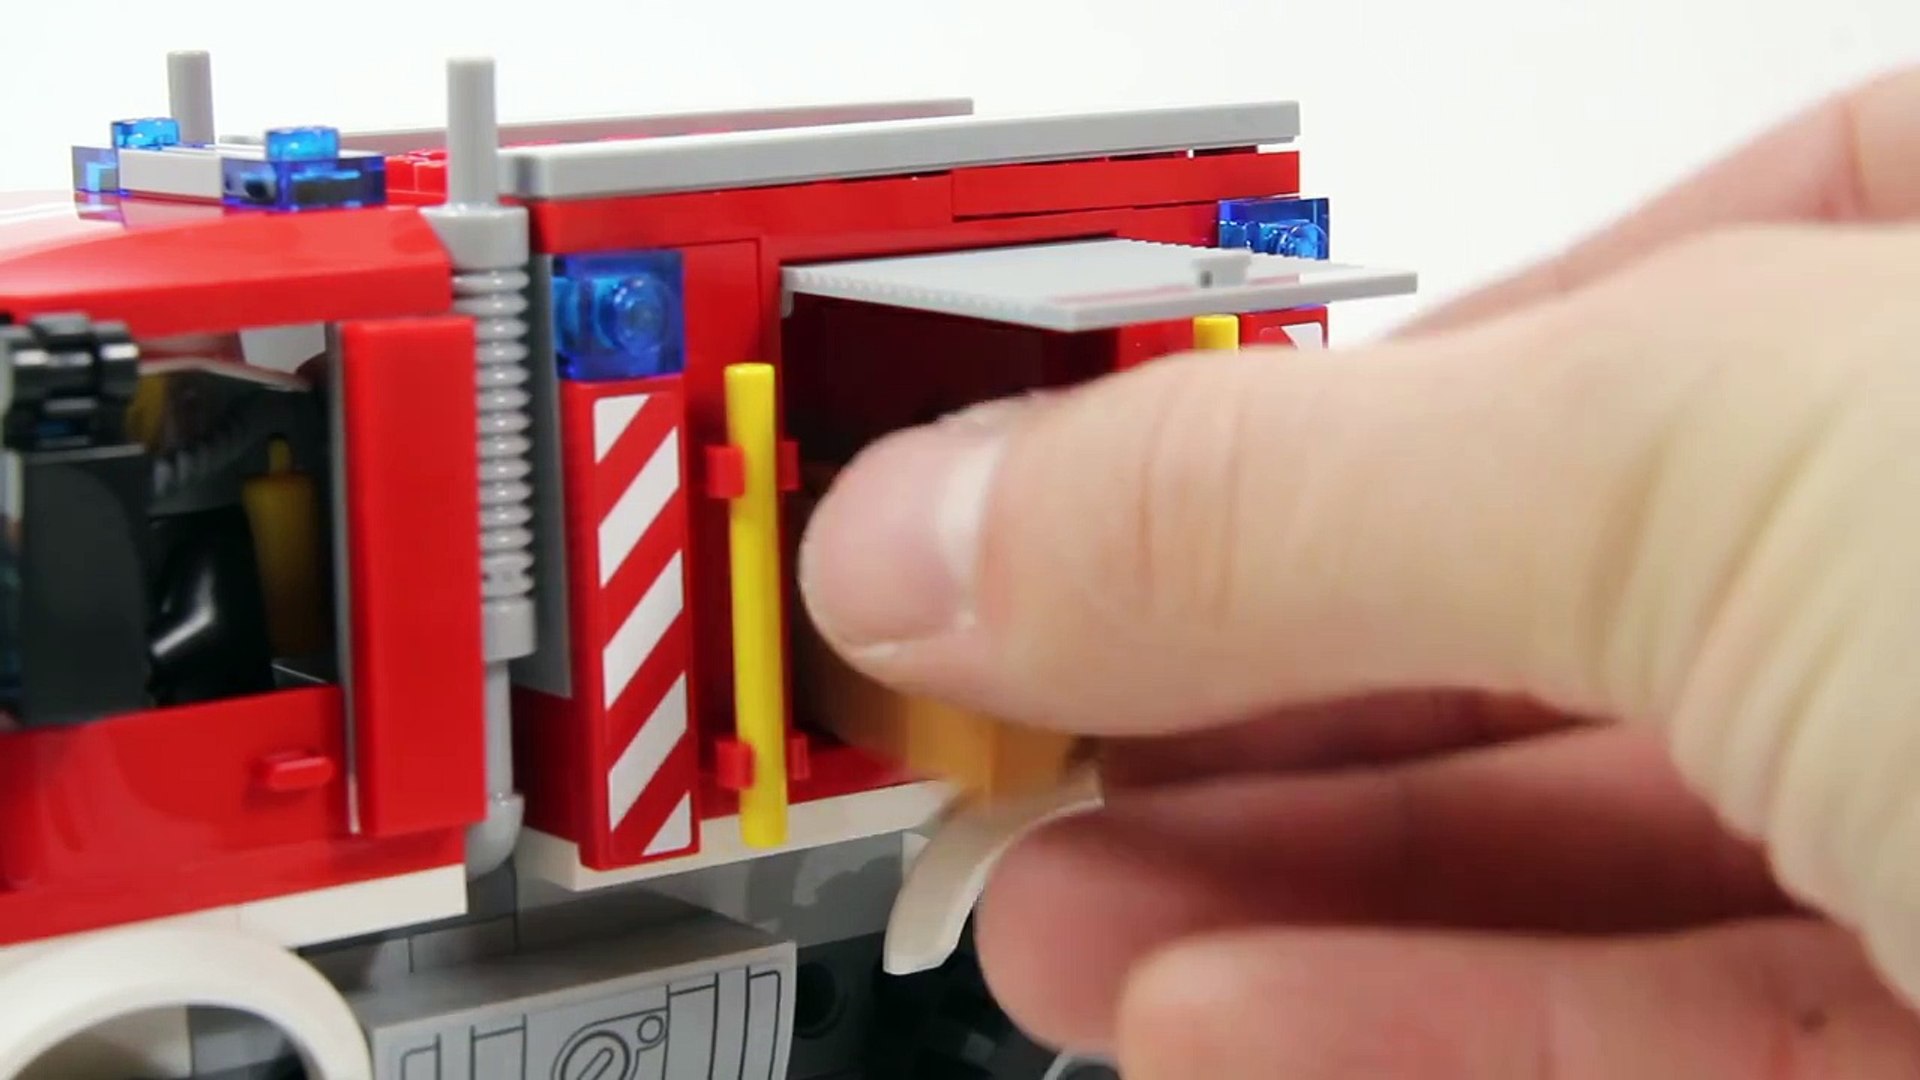 Lego City 60111 Fire Utility Truck Lego Speed Build - Dailymotion Video